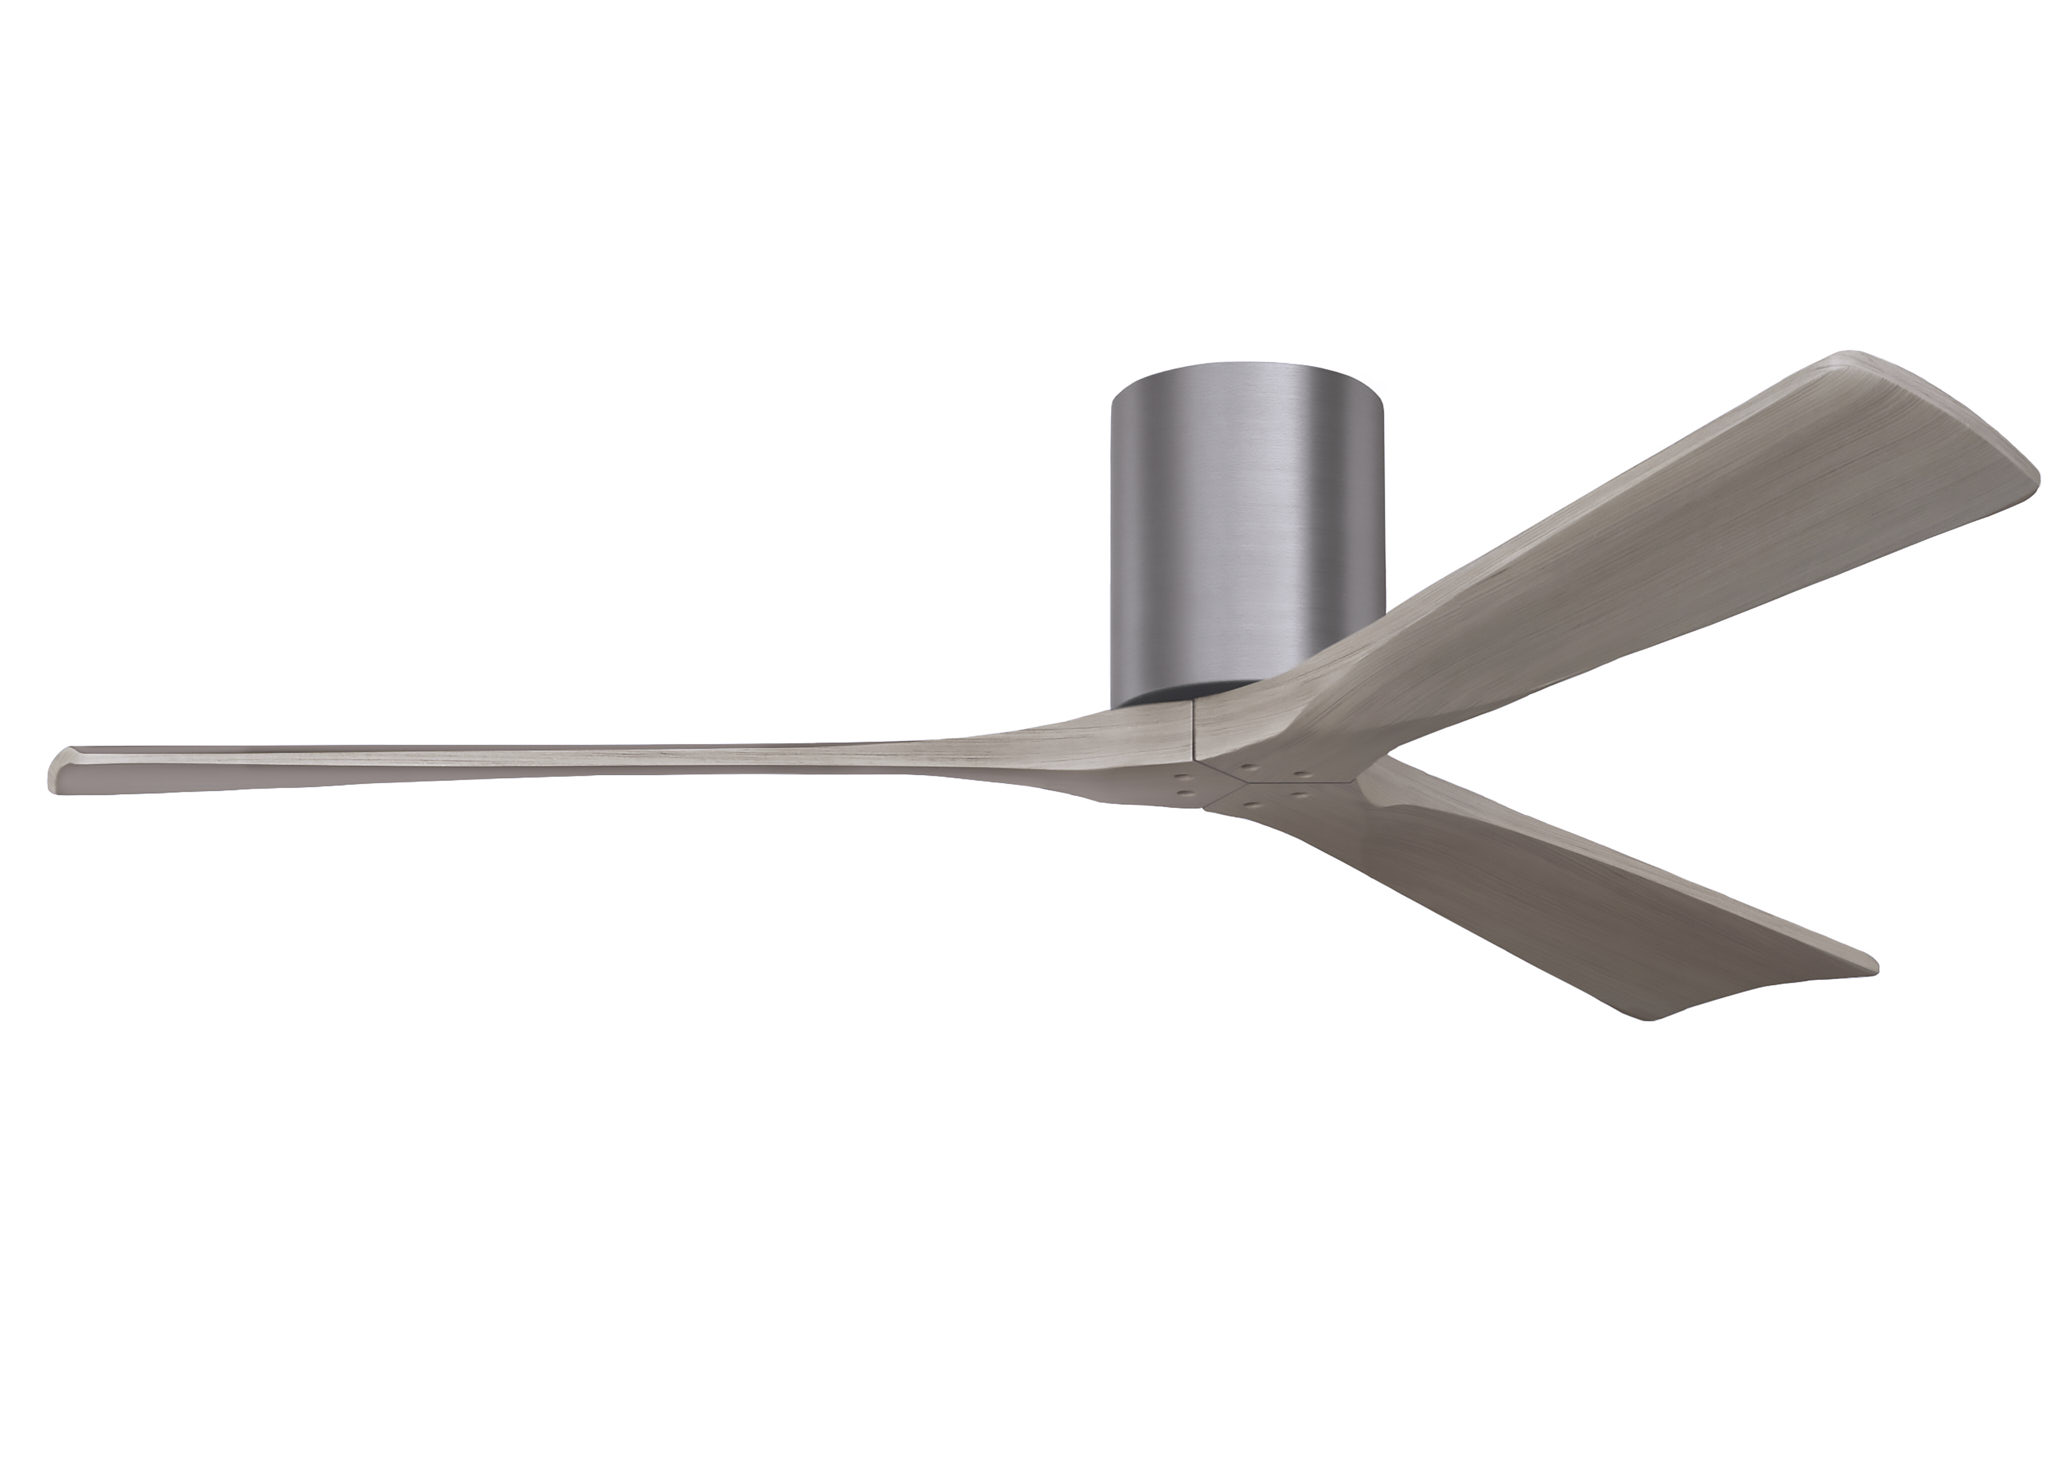 Irene-3H 6-speed ceiling fan in brushed pewter finish with 60